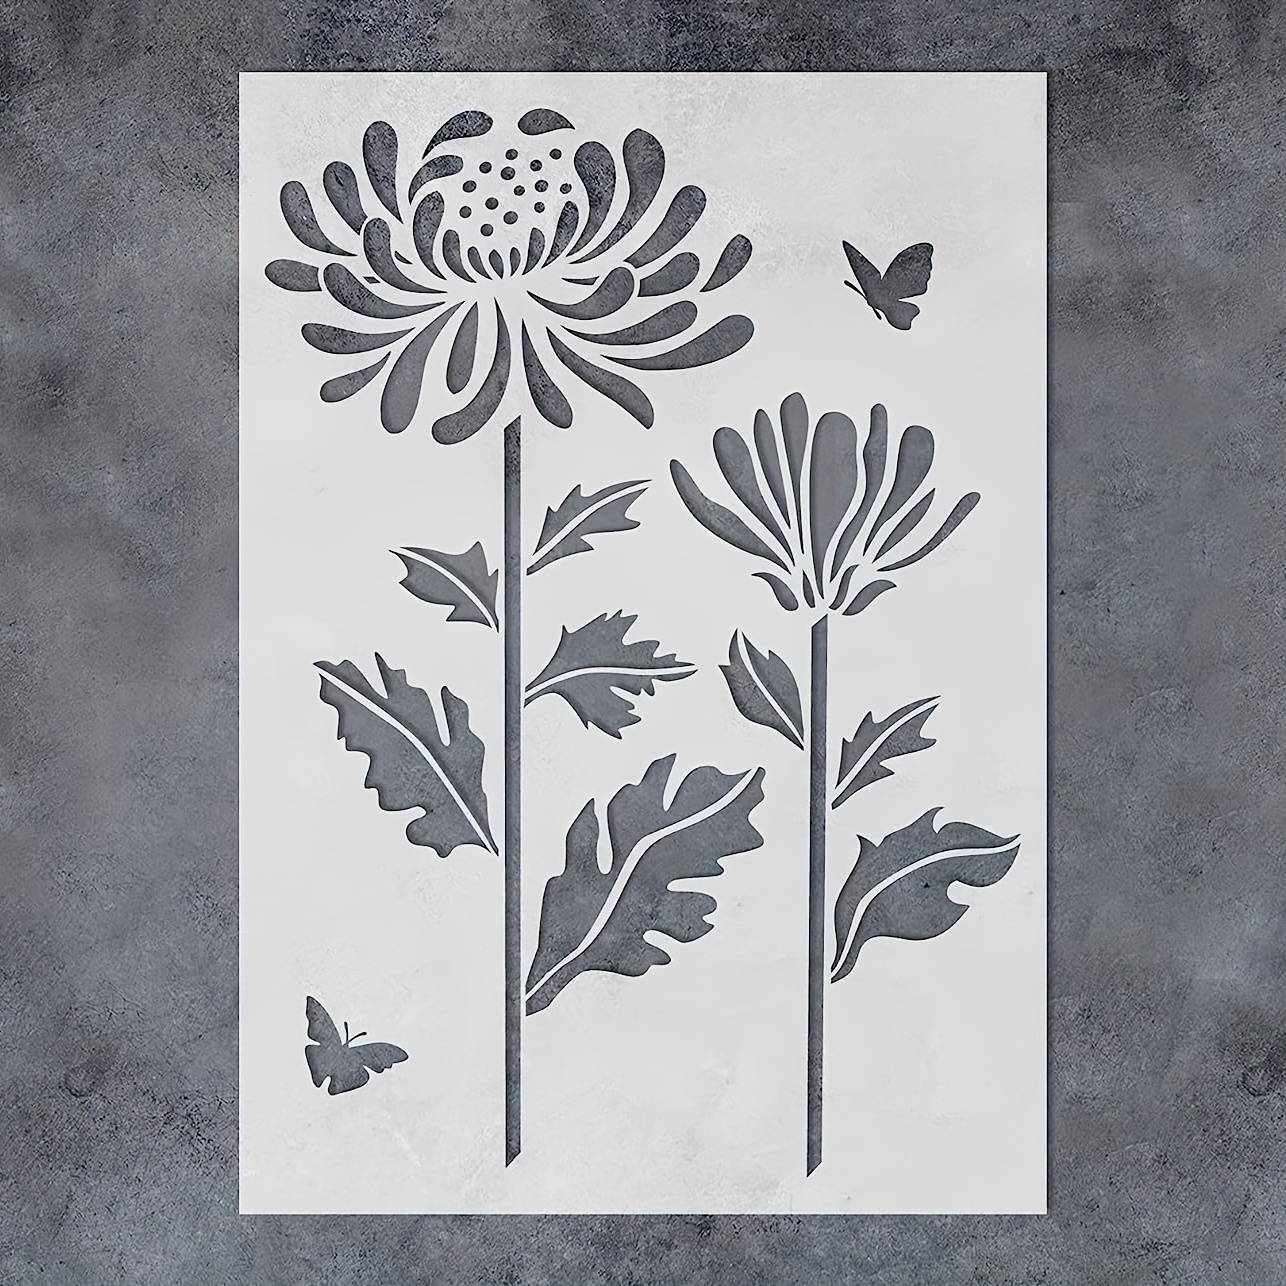 Sunflower Stencils for Painting on Wood Canvas Paper Fabric 